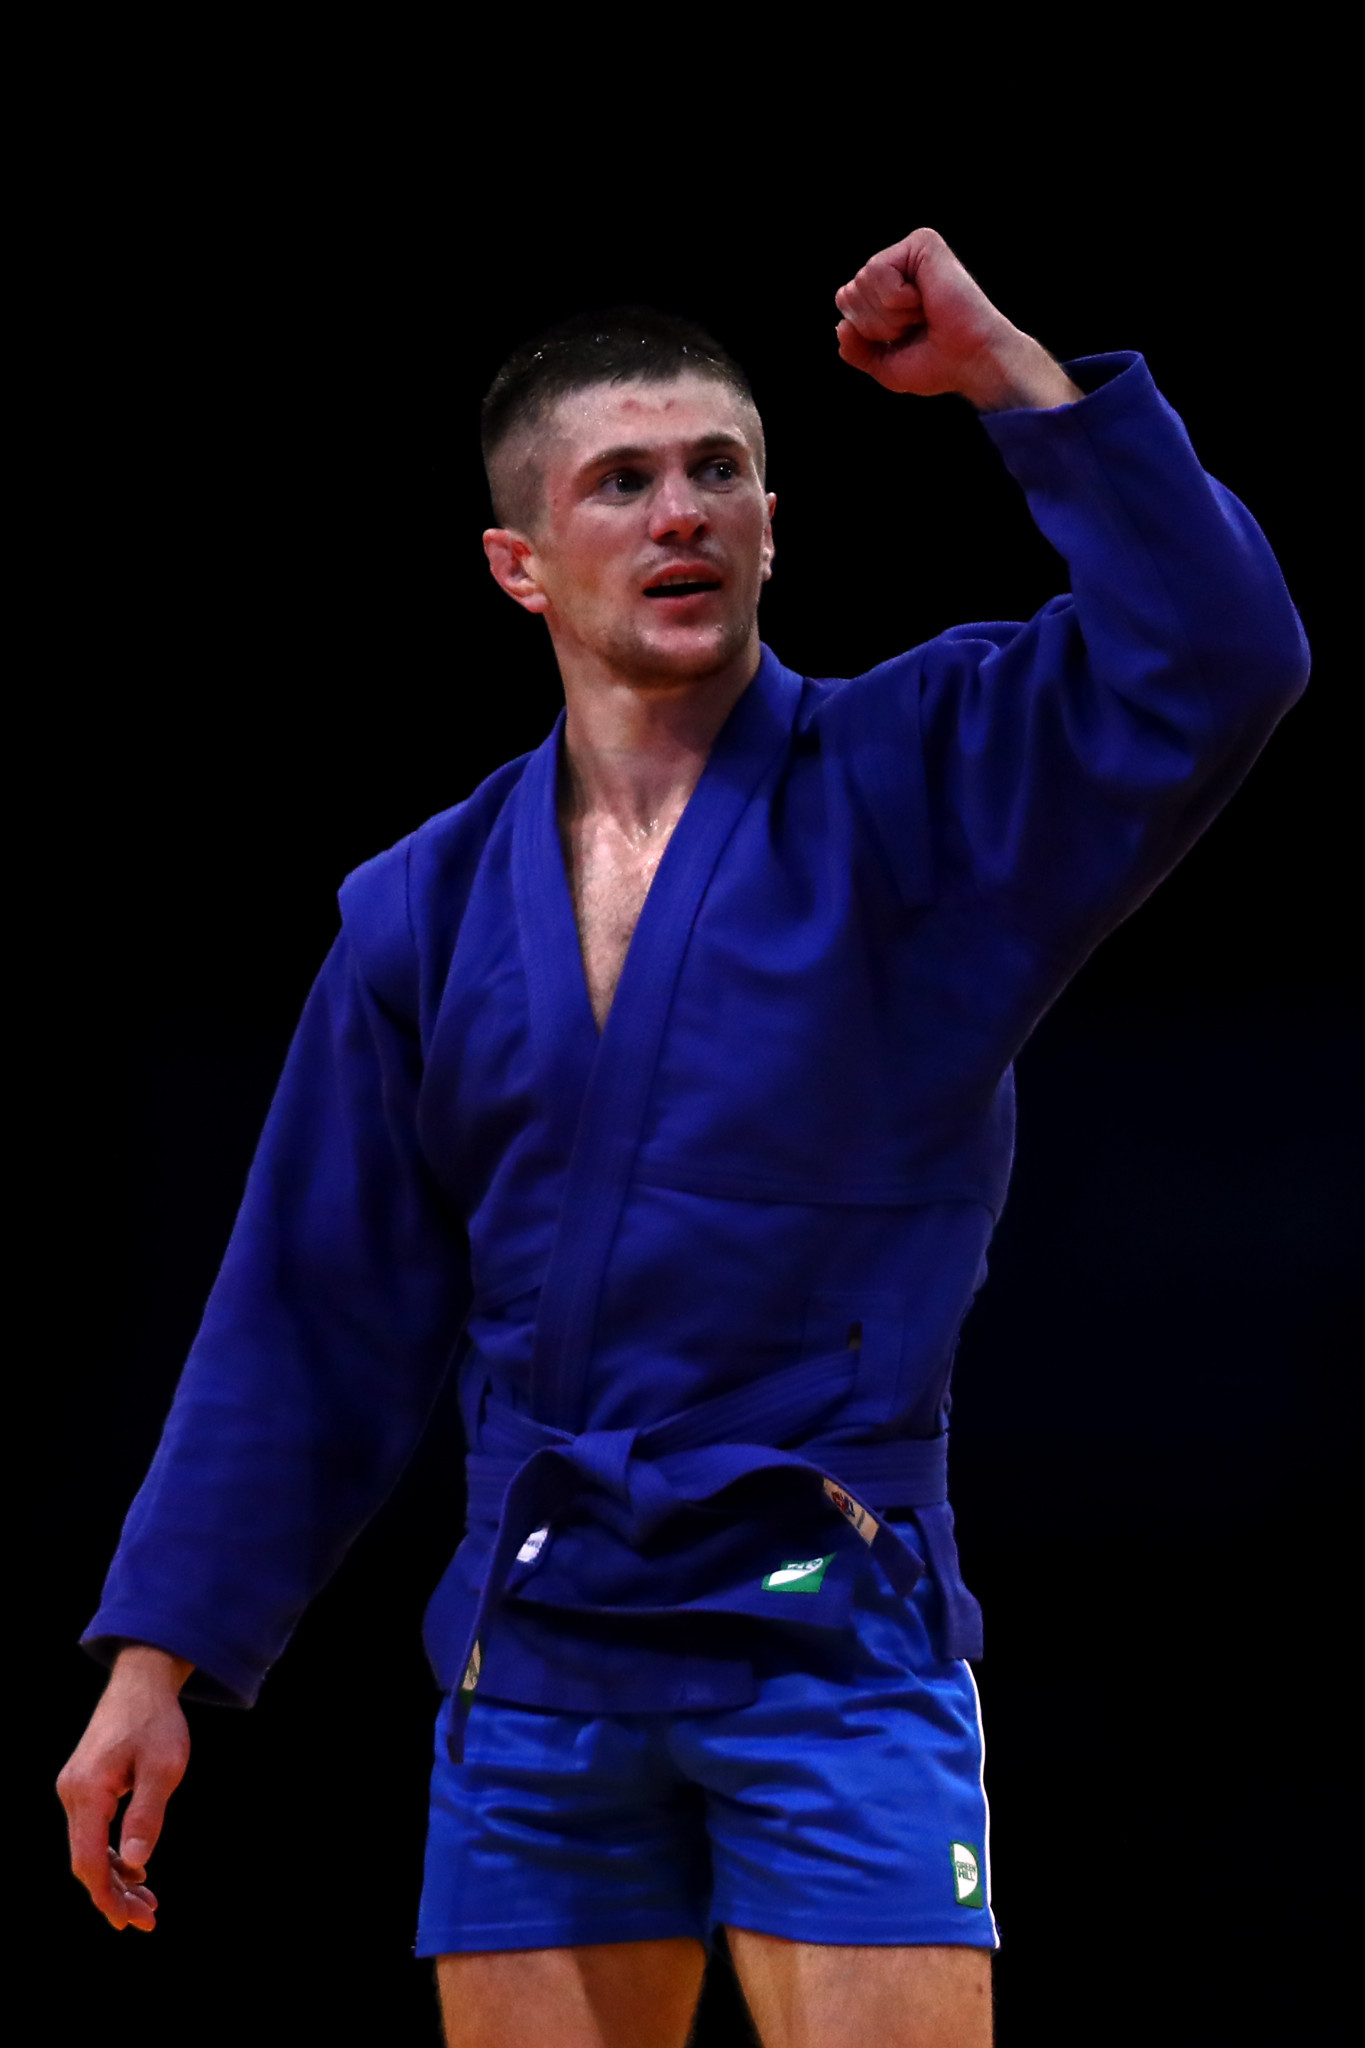  Home athlete Aliaksandr Koksha earned gold with a 5-0 win over Georgia’s Mindia Liluashvili in the men’s under-68kg category.©Getty Images